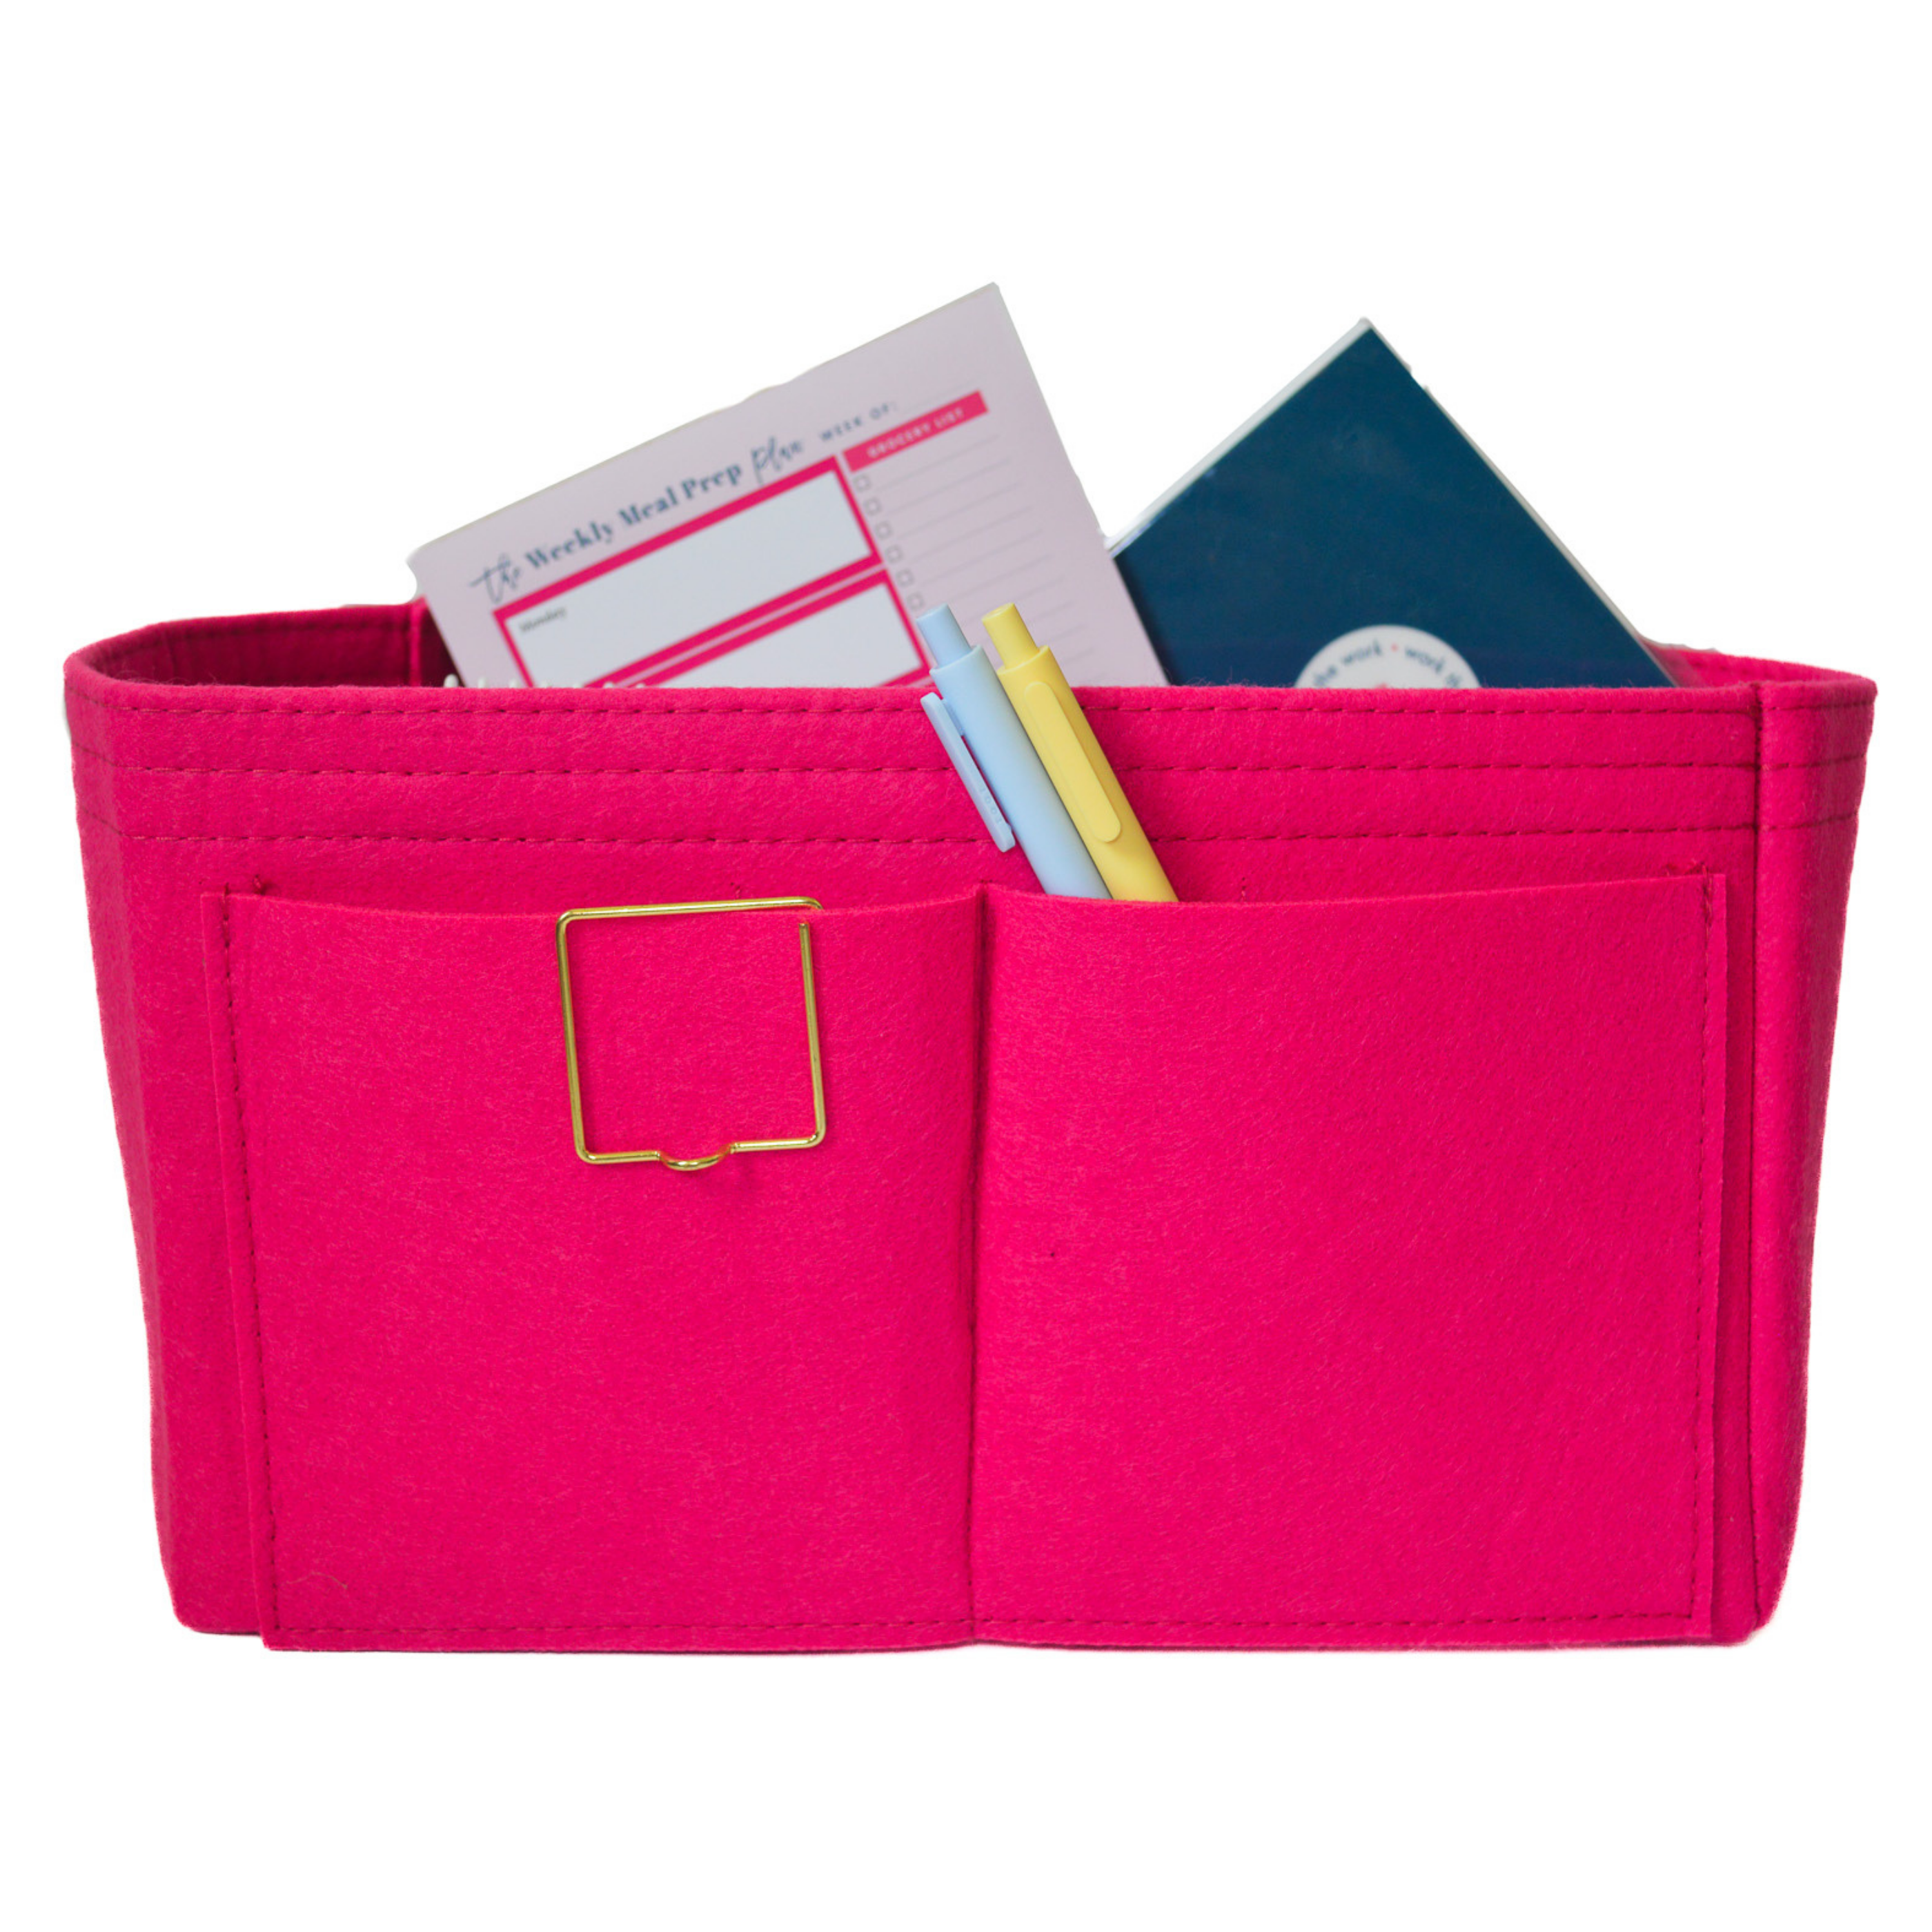 The Tote Organizer - The Plan By Lauren Truslow